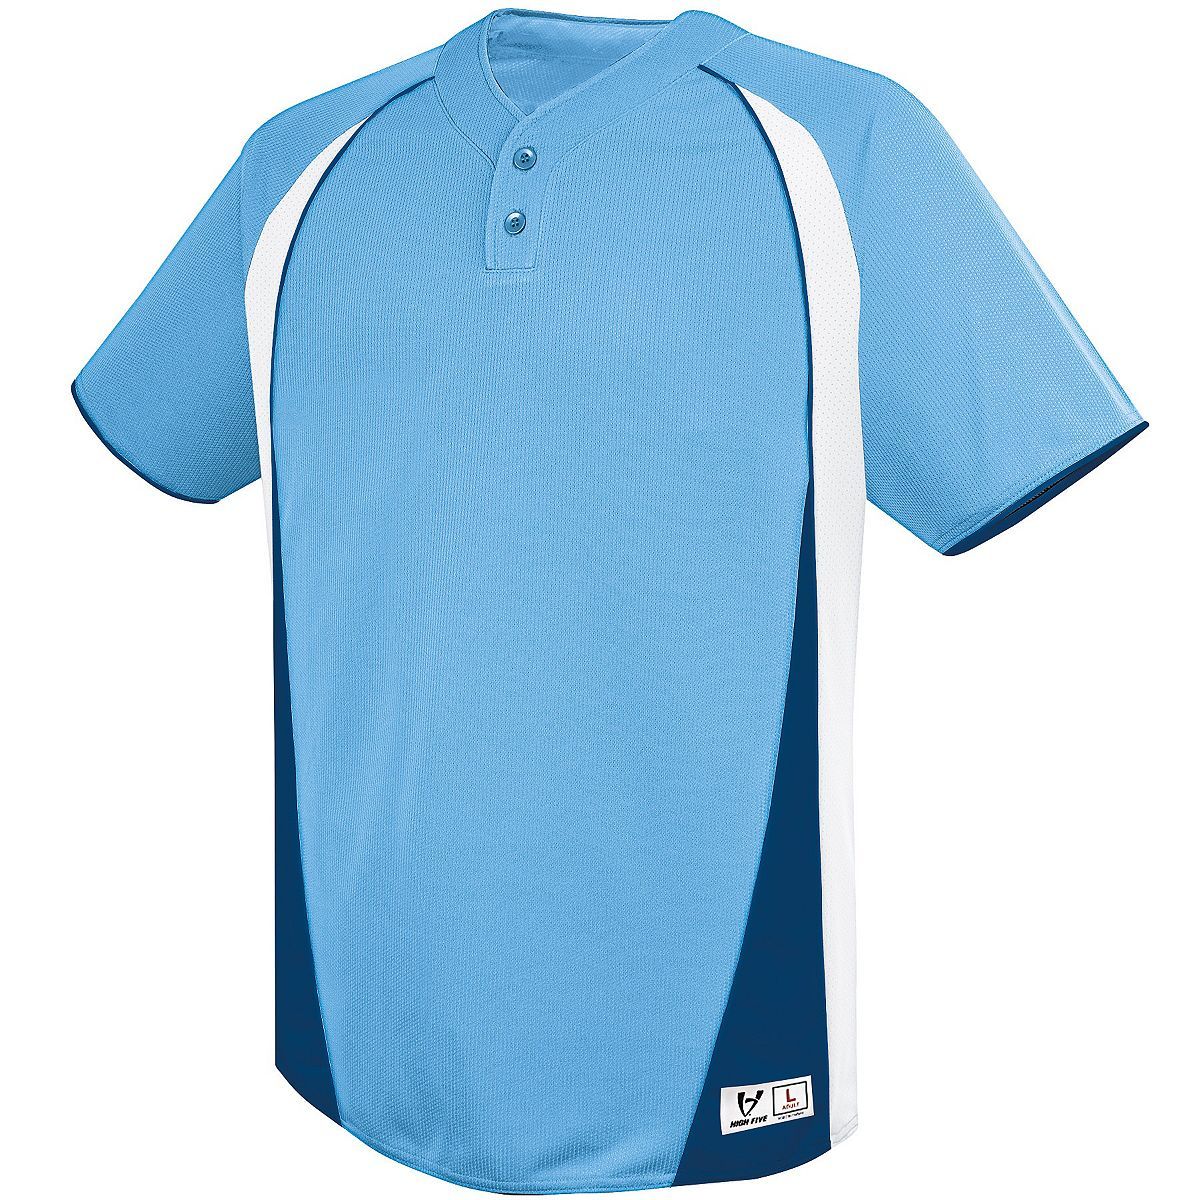 Augusta Sportswear Ace Two-Button Jersey in Columbia Blue/White/Navy  -Part of the Adult, Adult-Jersey, Augusta-Products, Baseball, Shirts, All-Sports, All-Sports-1 product lines at KanaleyCreations.com